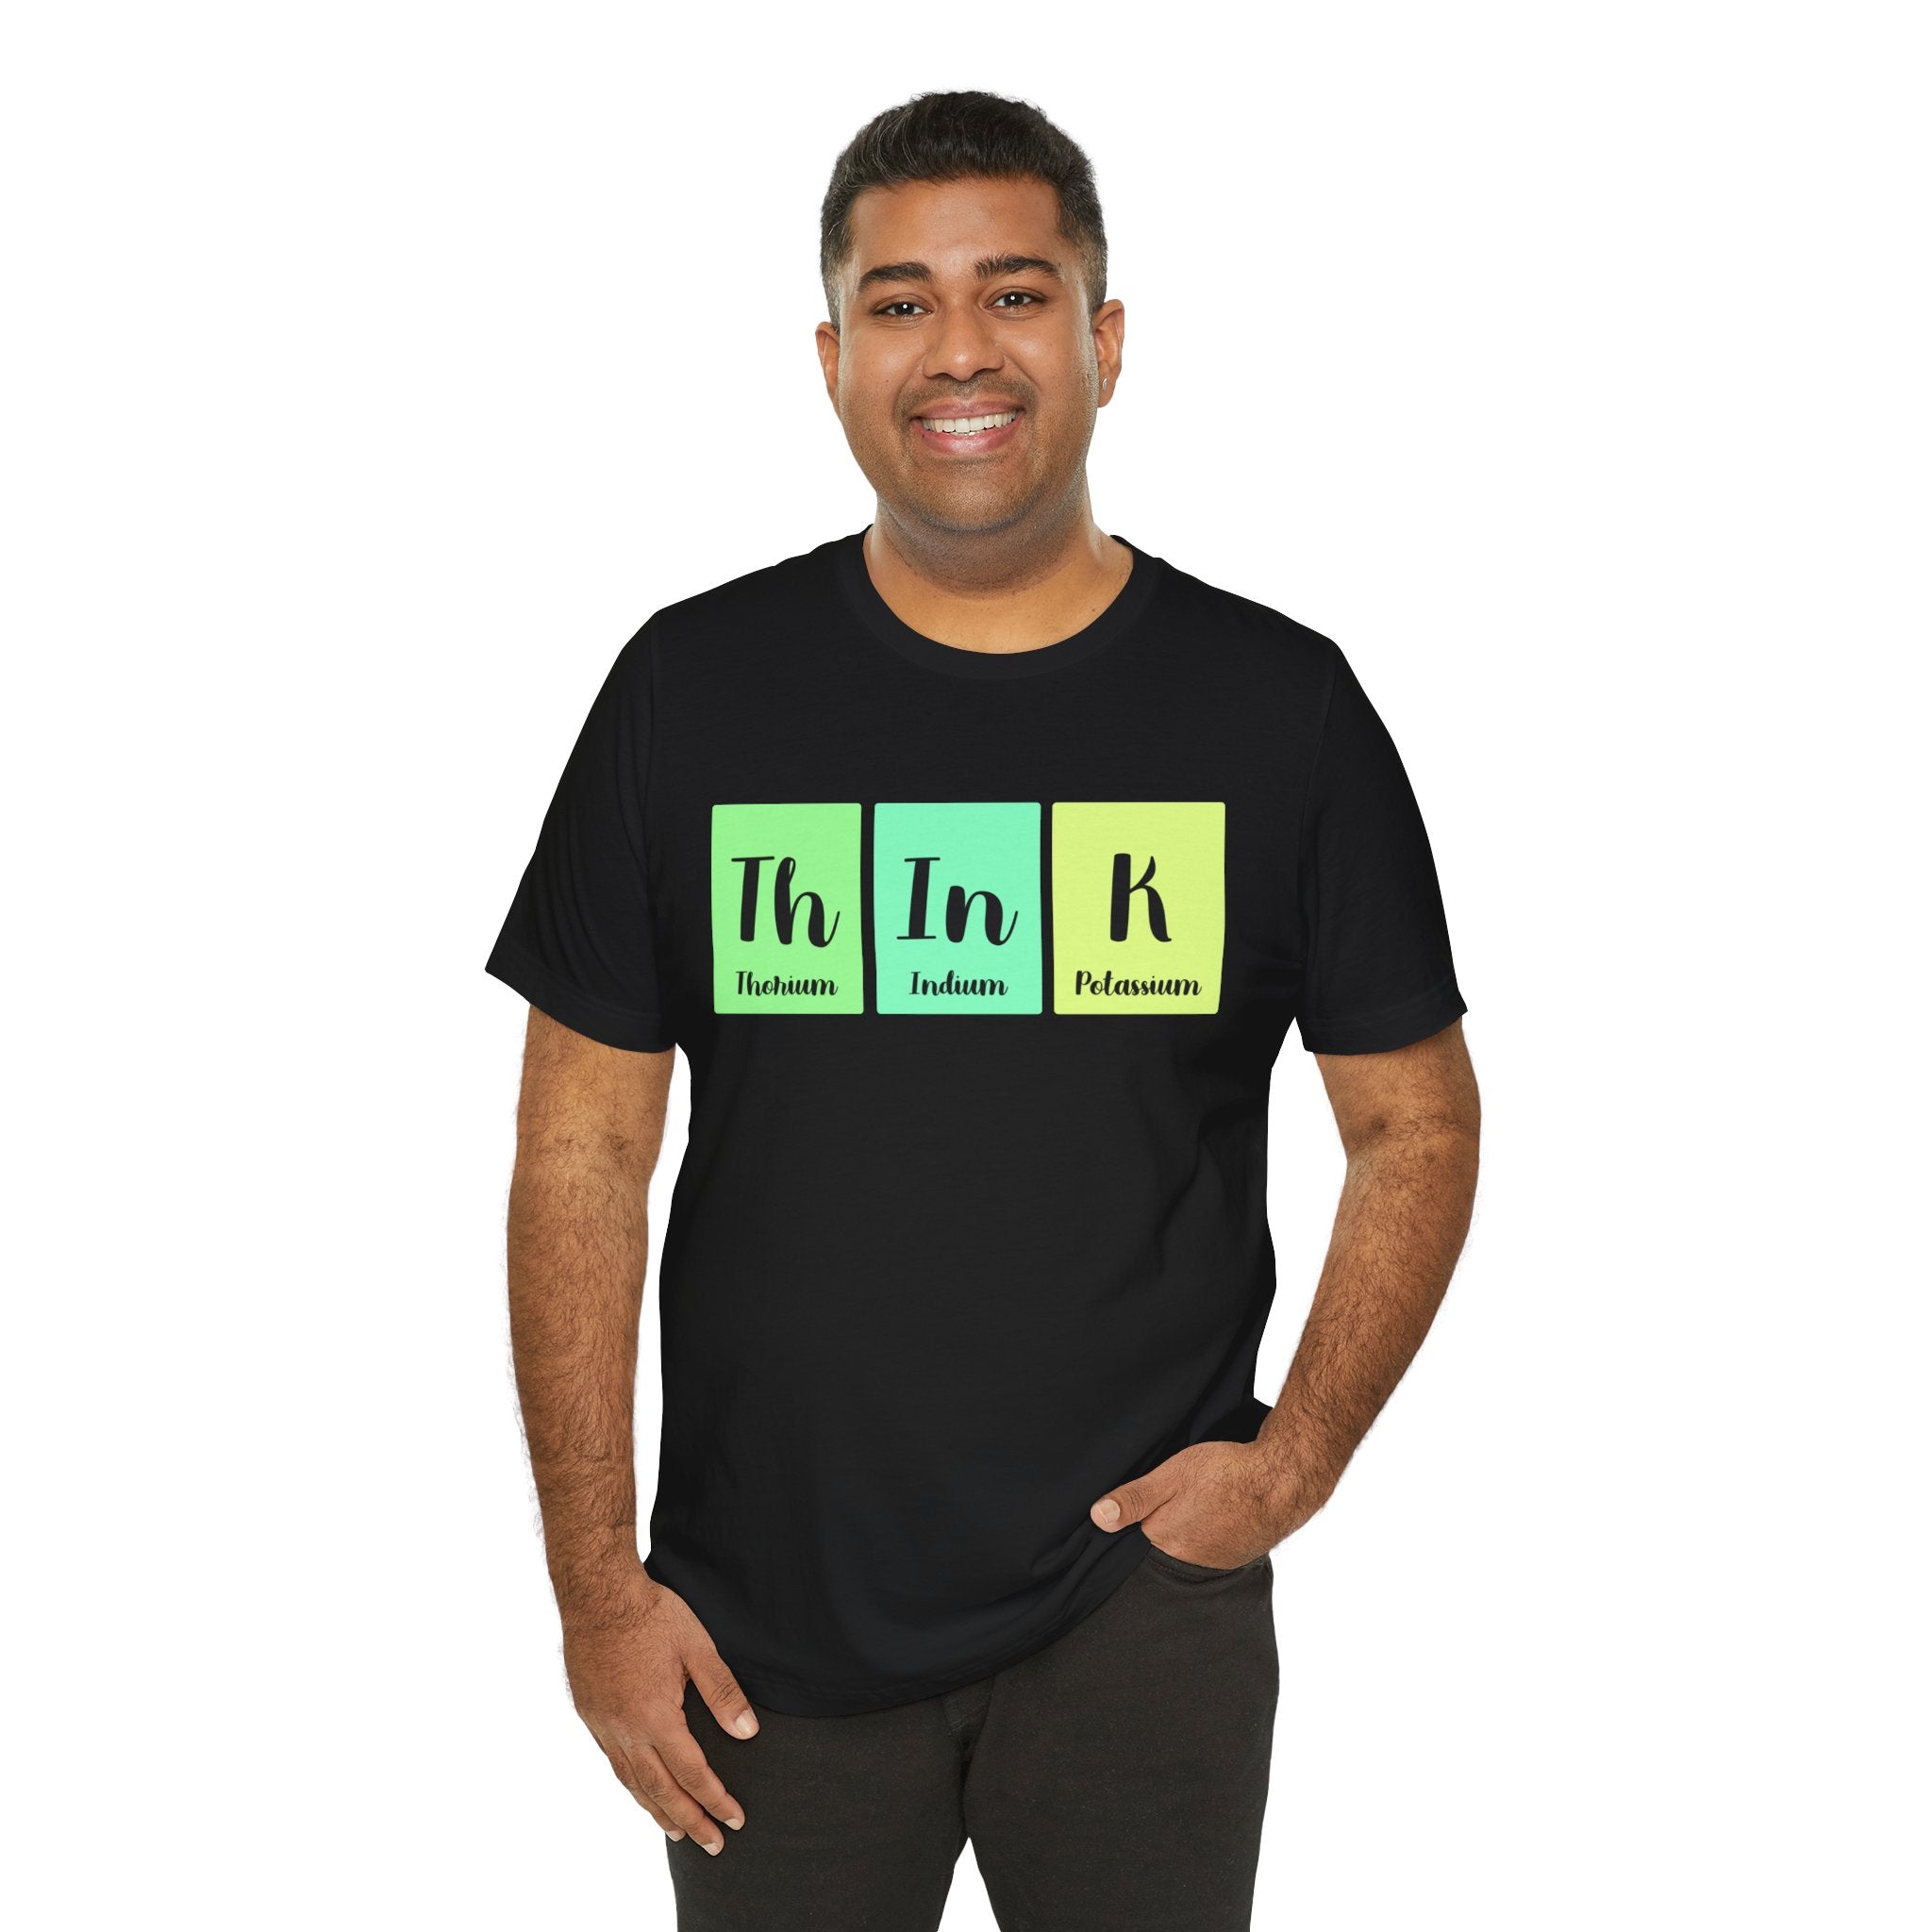 Man smiling, wearing a Th-In-k unisex jersey tee in black with "th in k" in green, blue, and yellow, representing elements thorium, indium, and potassium.